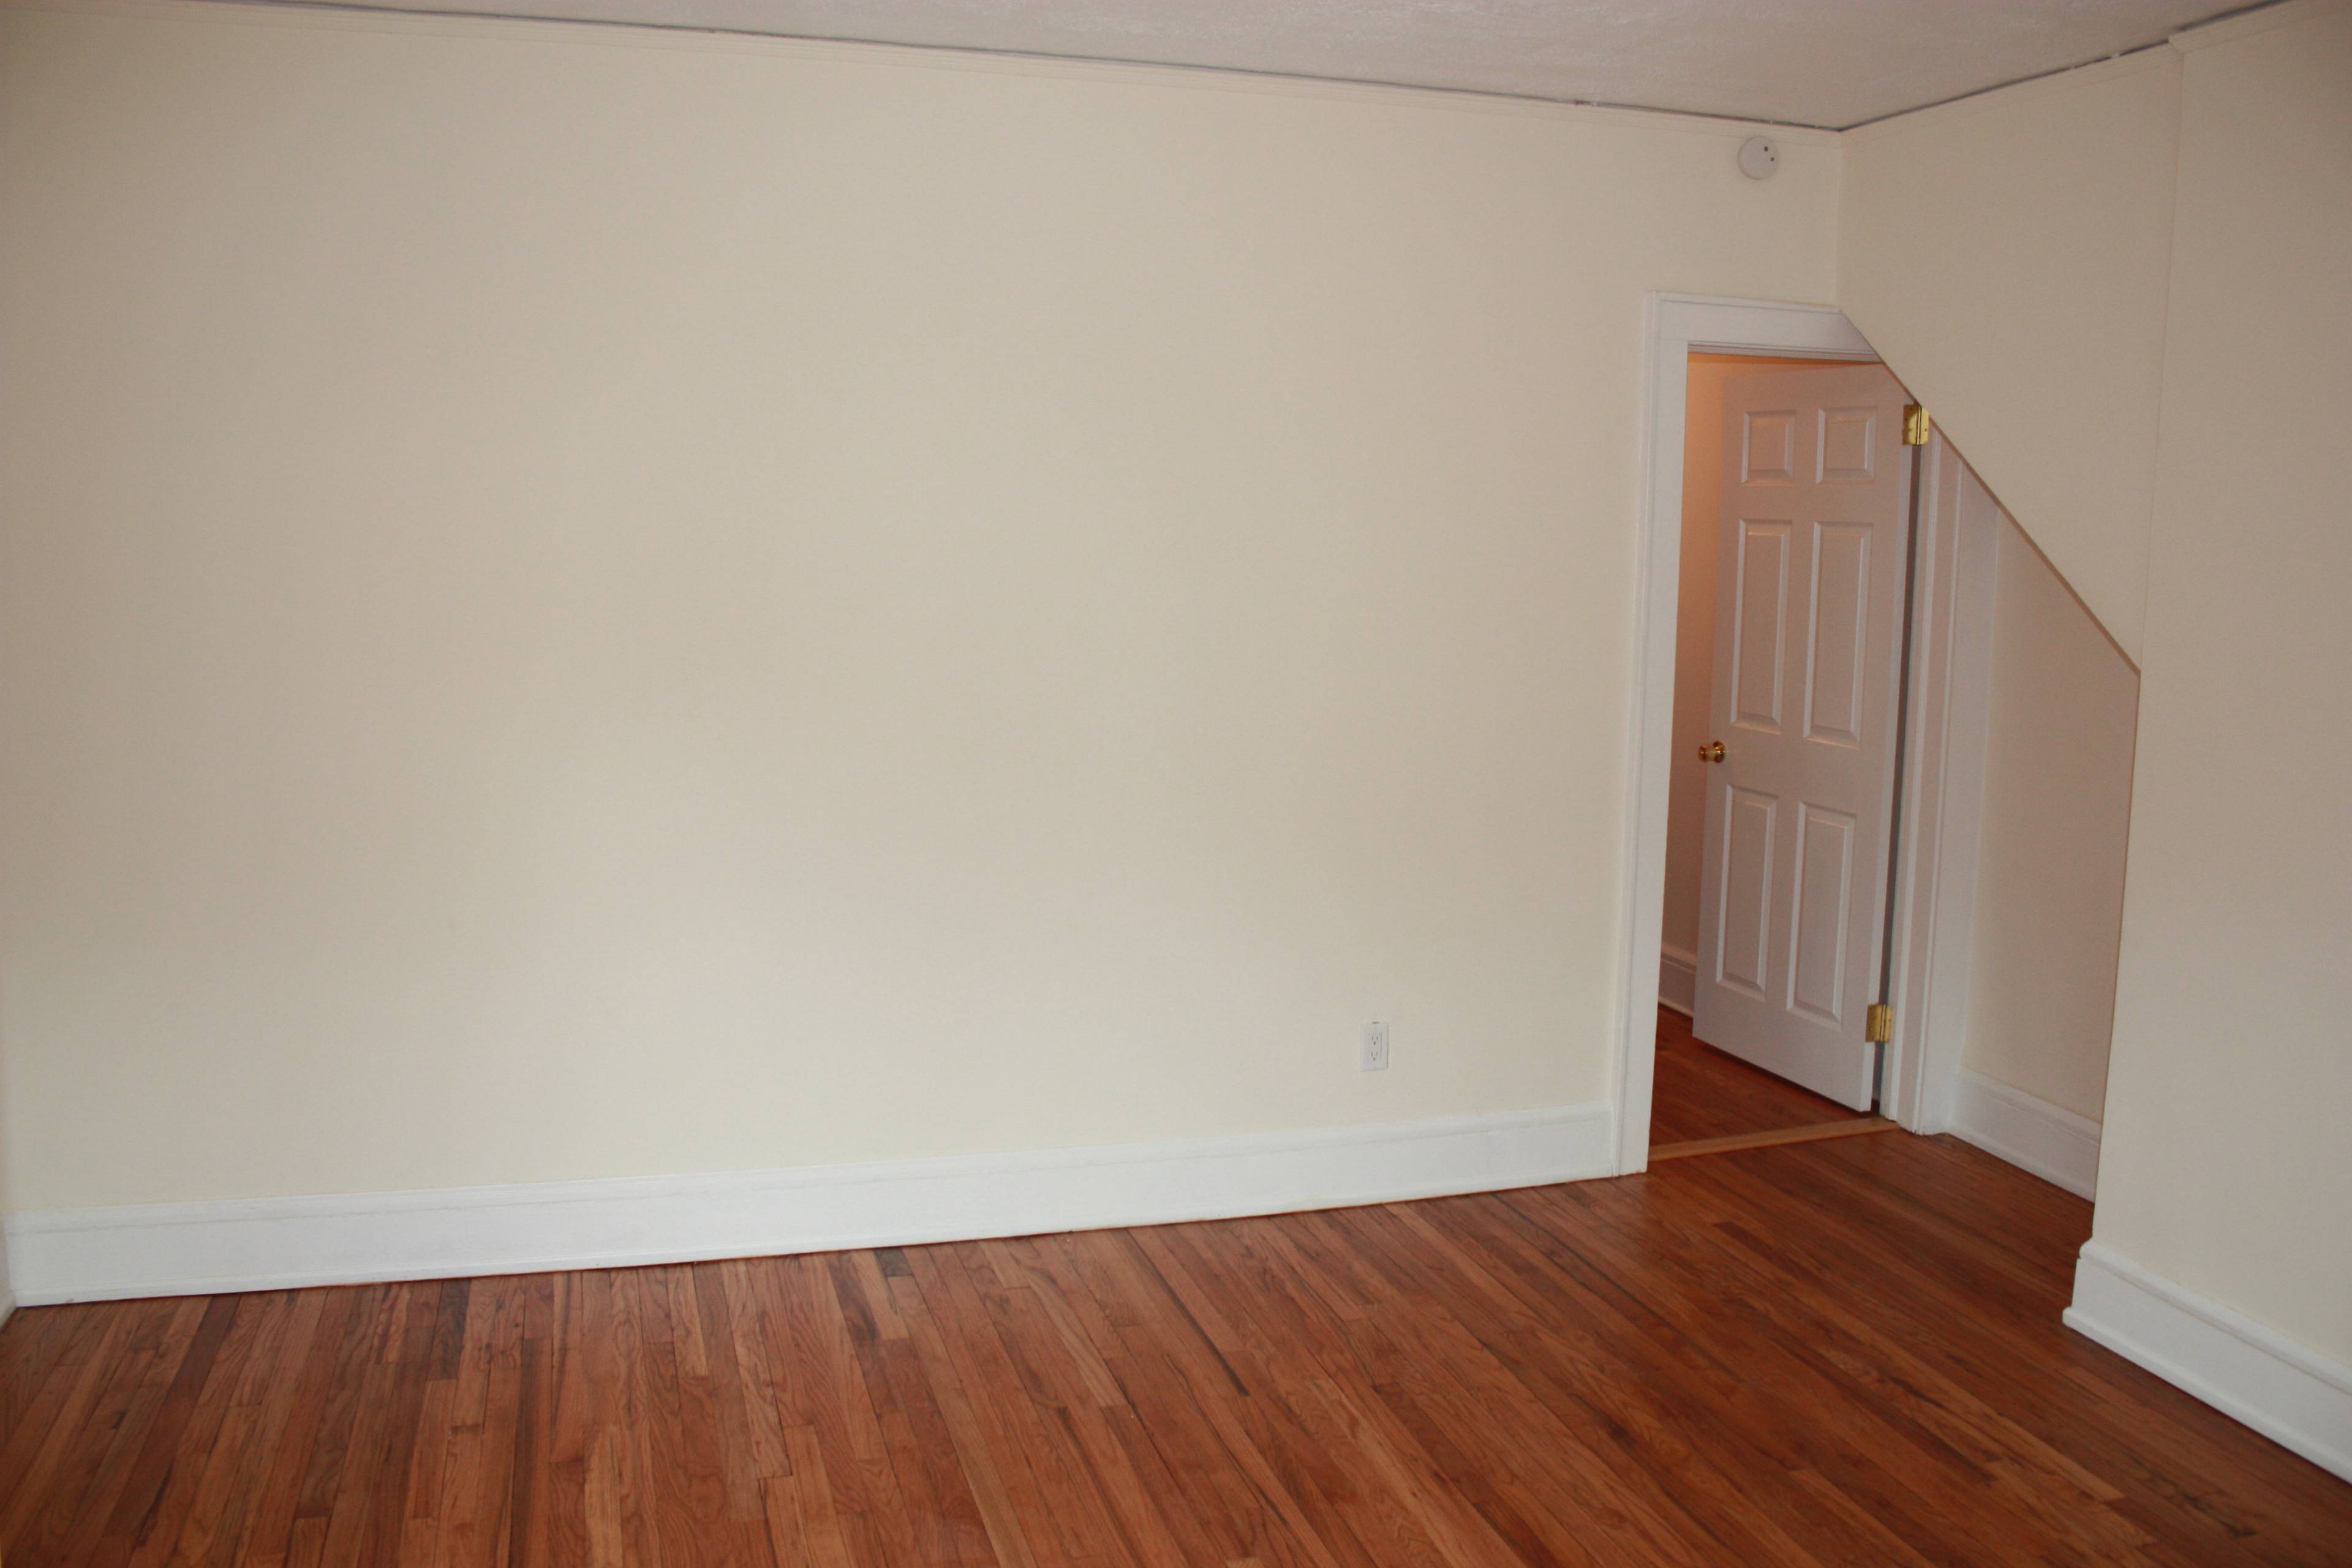 LOVELY TWO BEDROOM ONE BATH APARTMENT IN THE HEART OF WHITE PLAINS IN WESTCHESTER!!!!!!